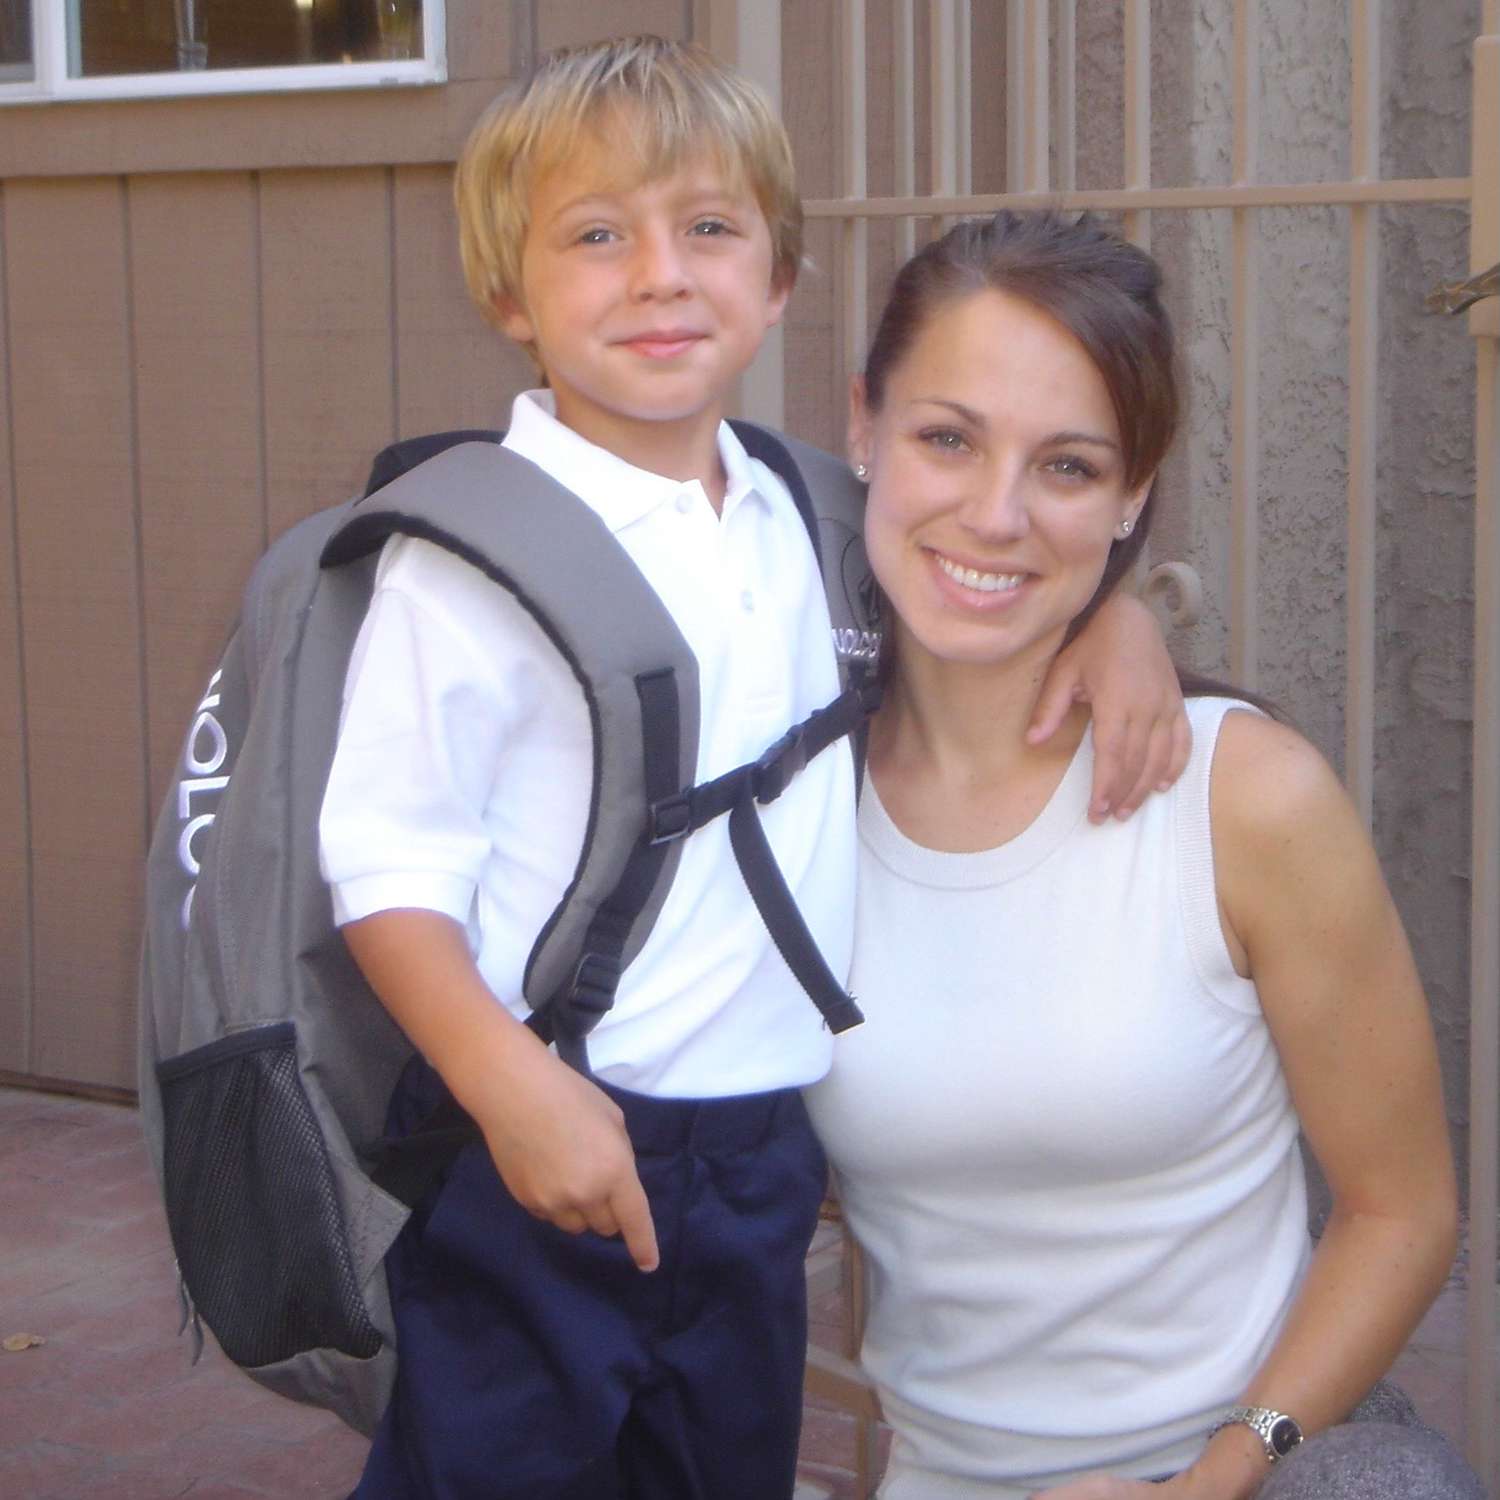 Nicole Saphier (right) and her son on his first day of first grade